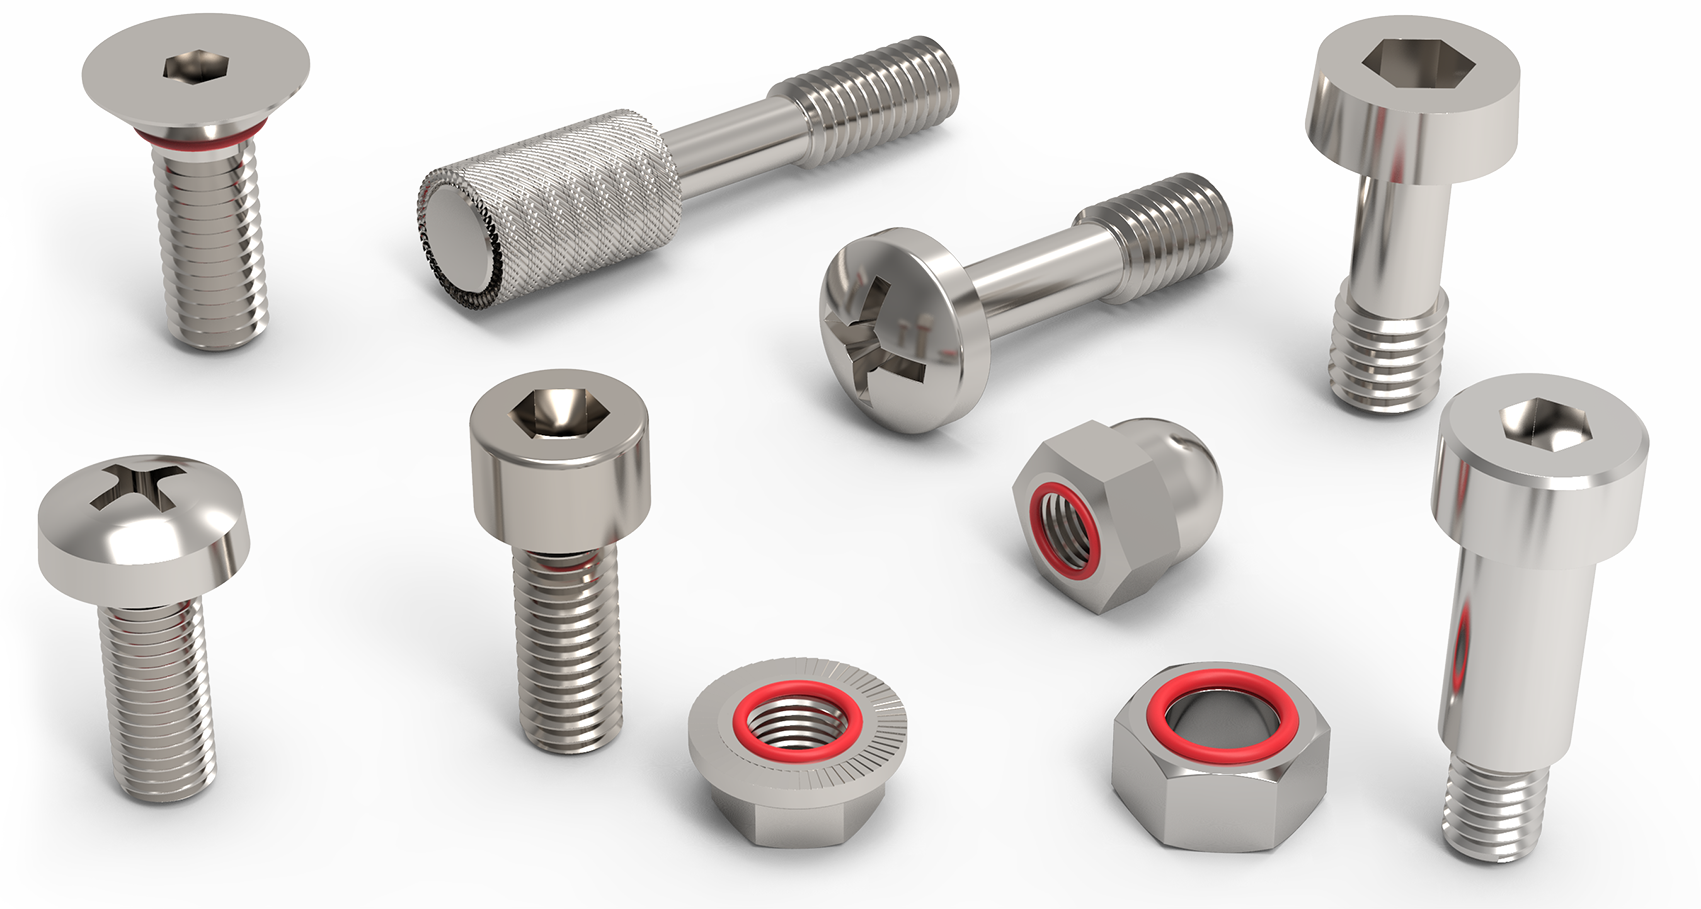 Captive Screws from Automotion